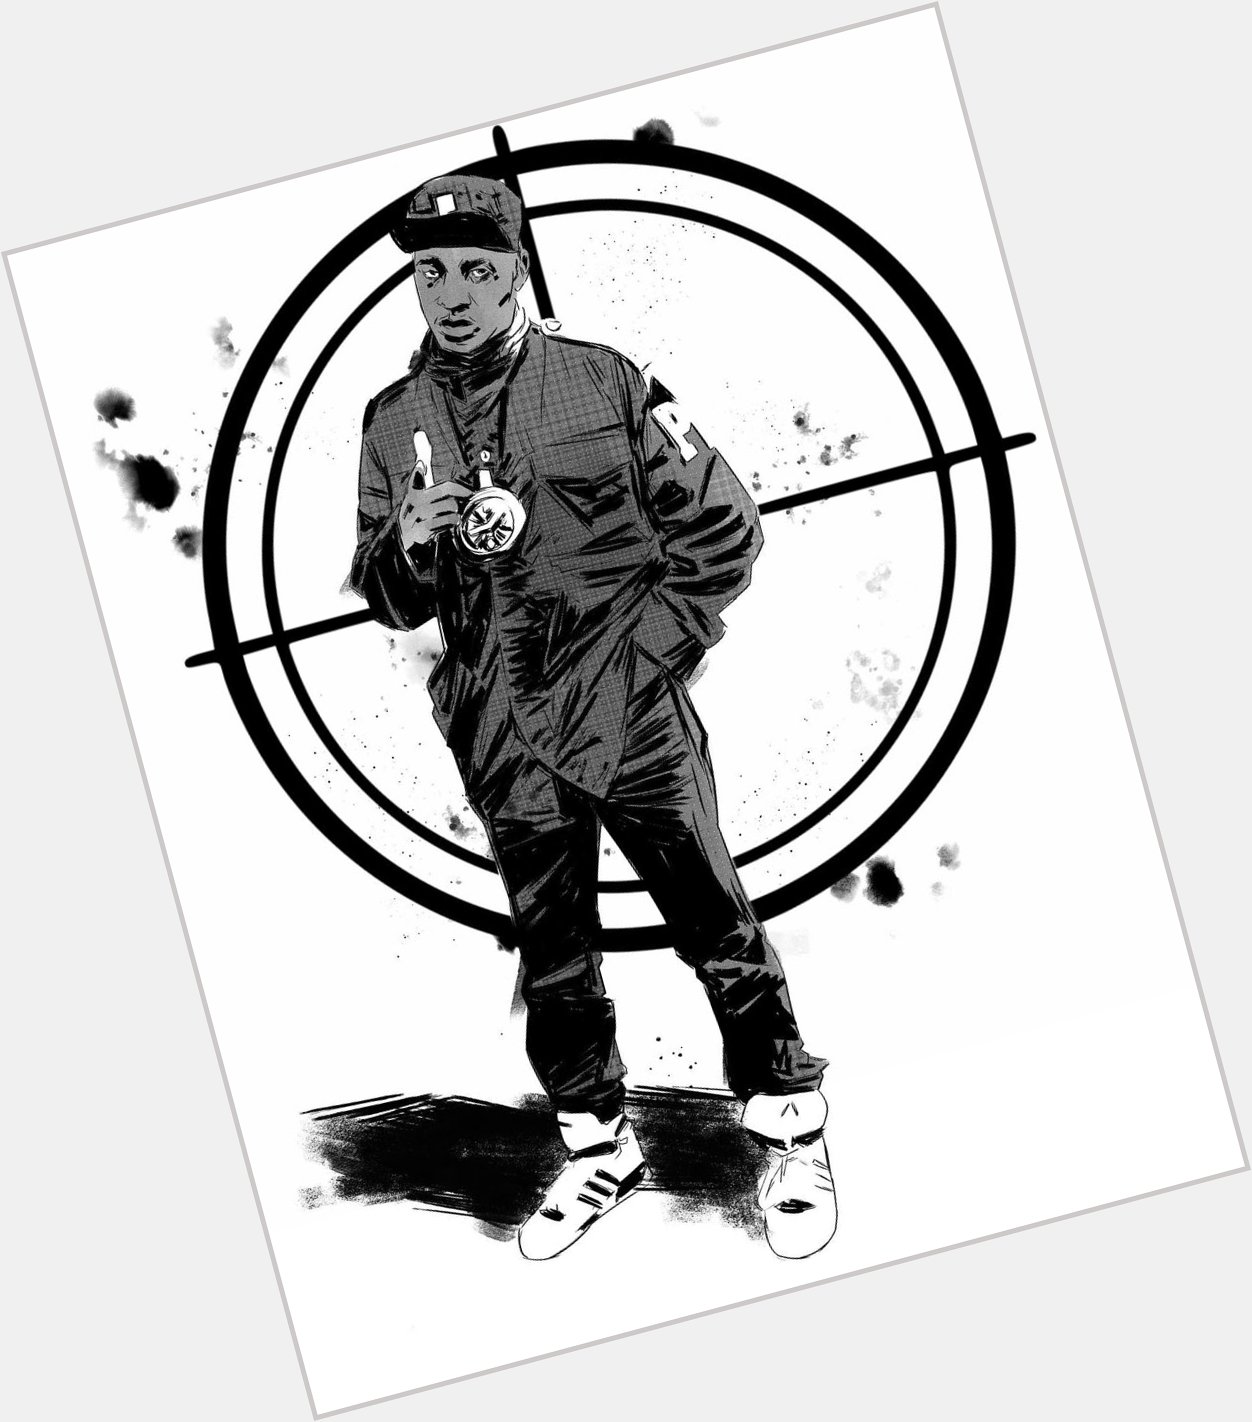 Yesterday s drawing - happy (now belated) birthday to Chuck D of Public Enemy    